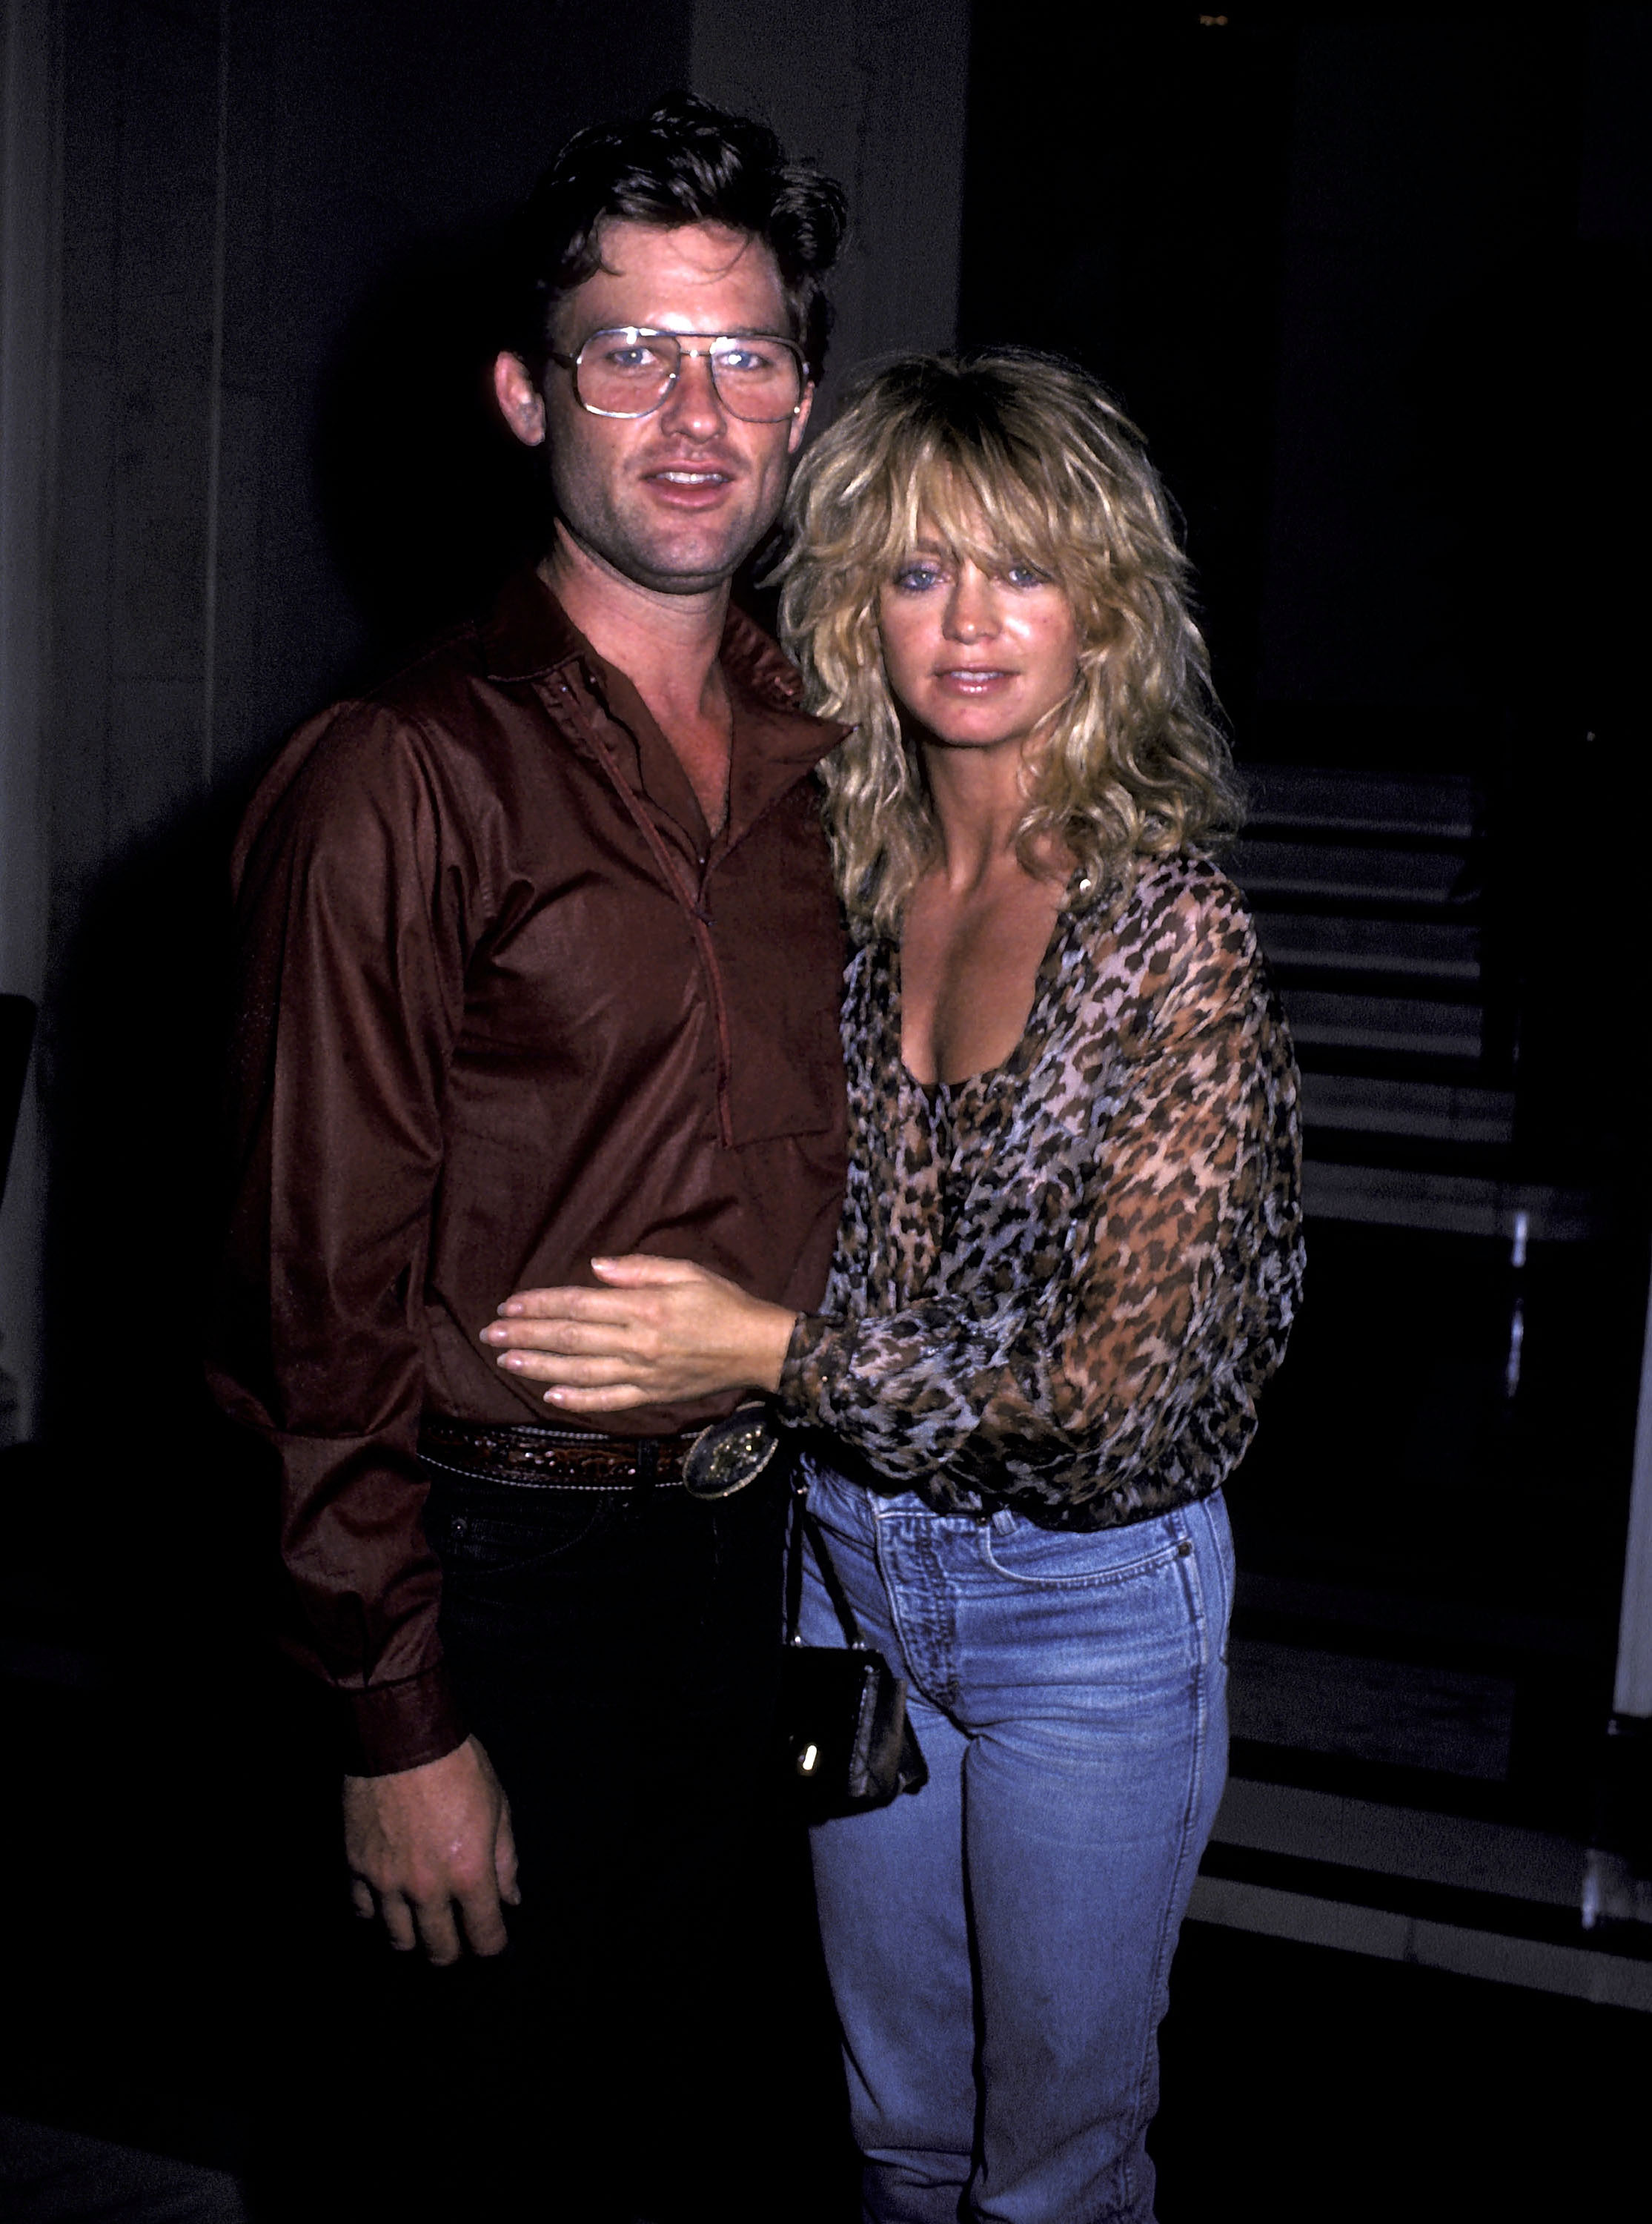 Kurt Russell and Goldie Hawn at the Carlyle Hotel on July 23, 1983 in New York City l Source: Getty Images